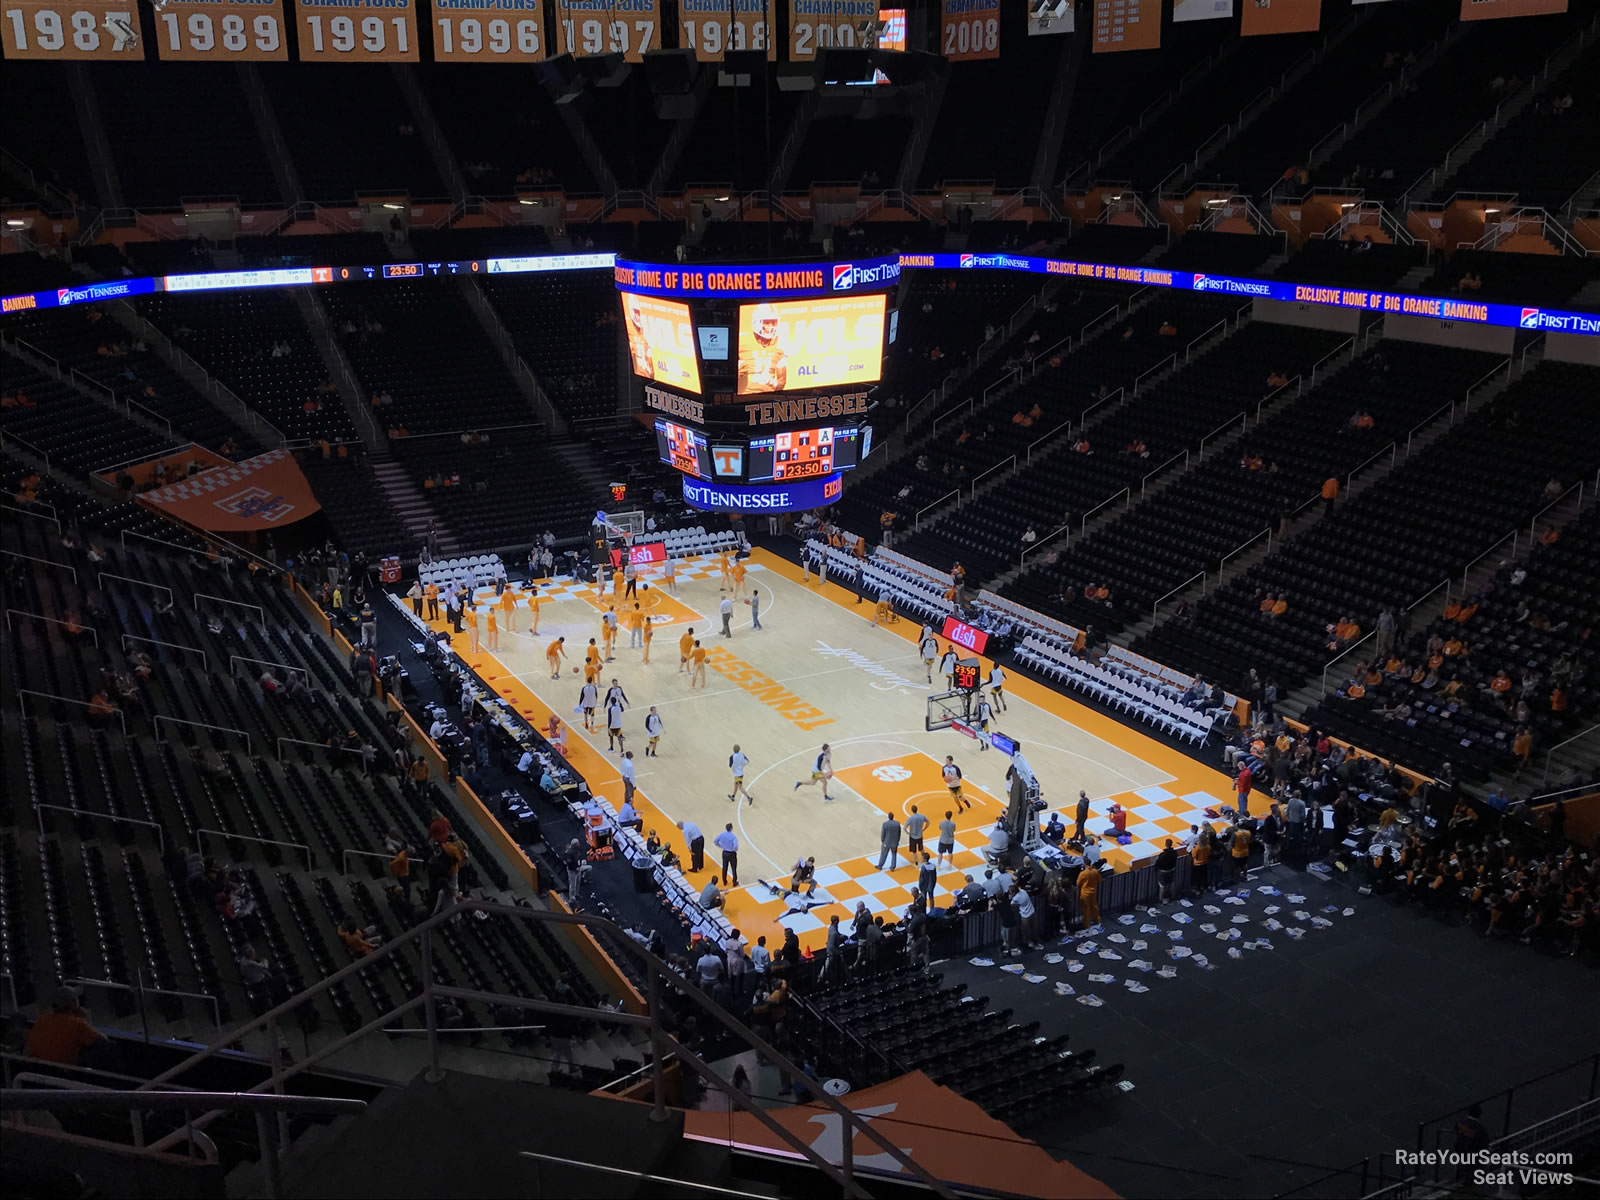 section 331, row 7 seat view  - thompson-boling arena